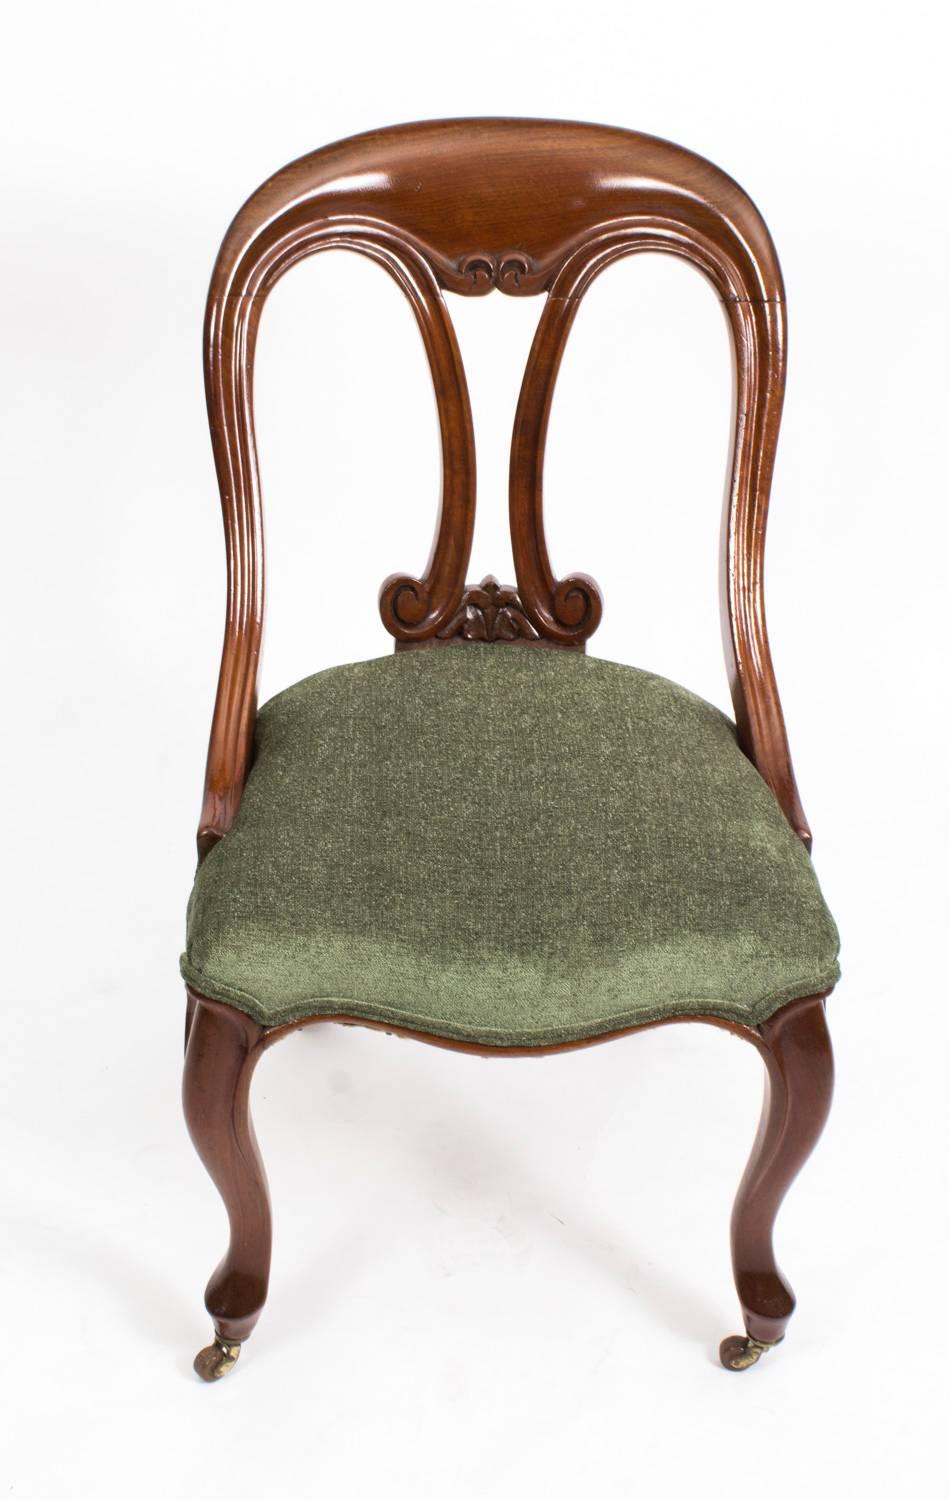 This is a superb pair of antique Victorian mahogany fiddle back side chairs, circa 1850 in date.

These chairs have been masterfully crafted in beautiful mahogany. They have carved back splats with an elegant green fabric upholstery and stand on